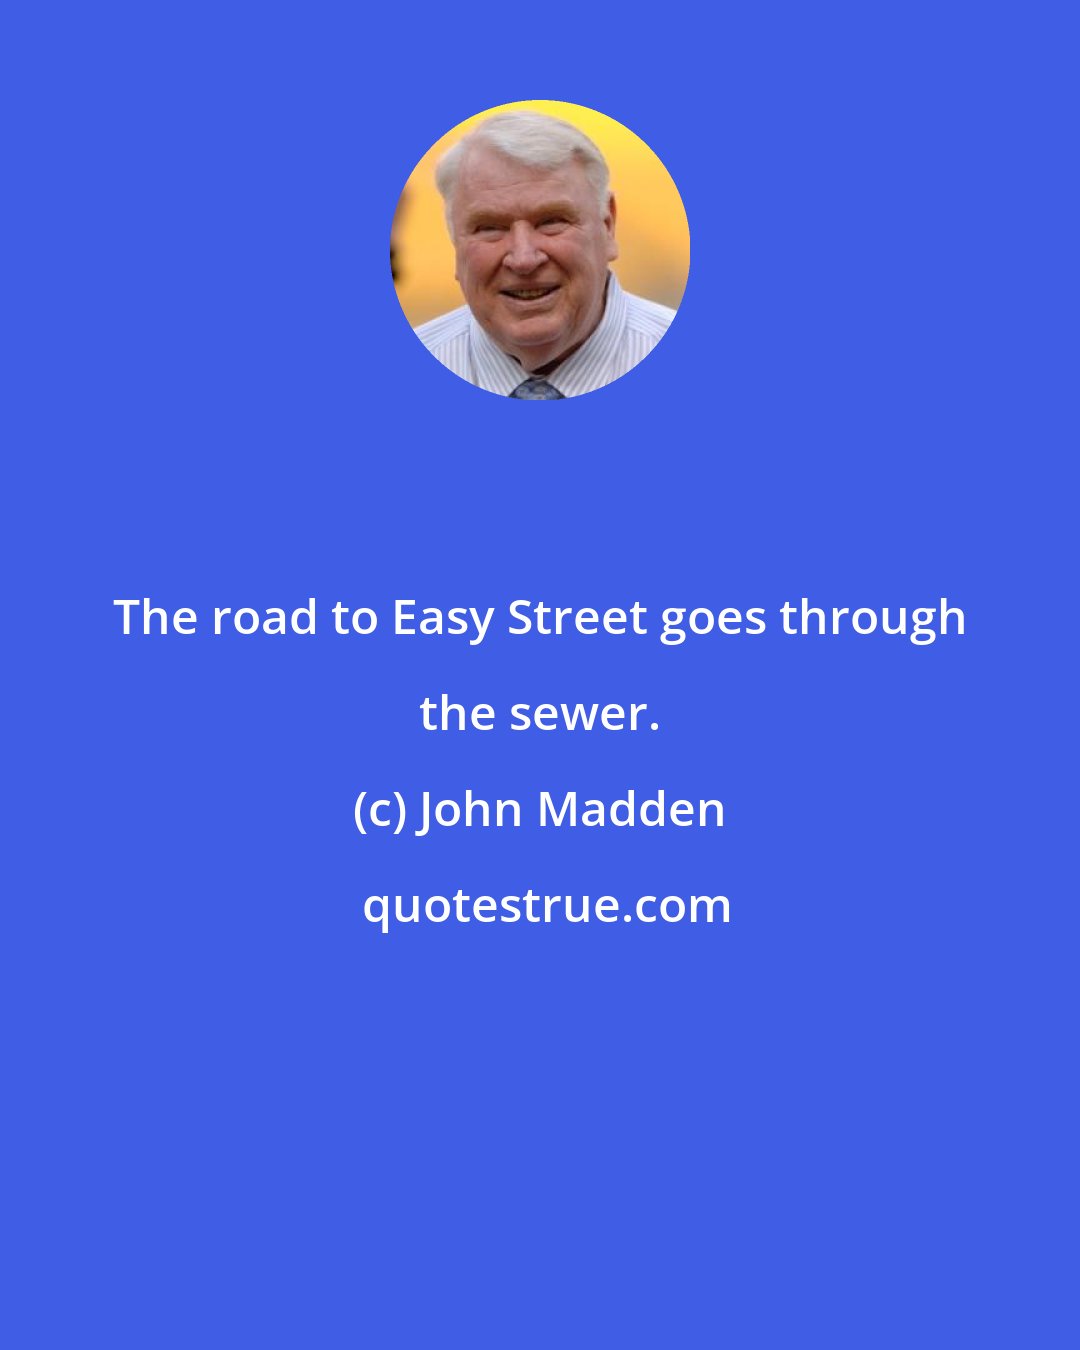 John Madden: The road to Easy Street goes through the sewer.